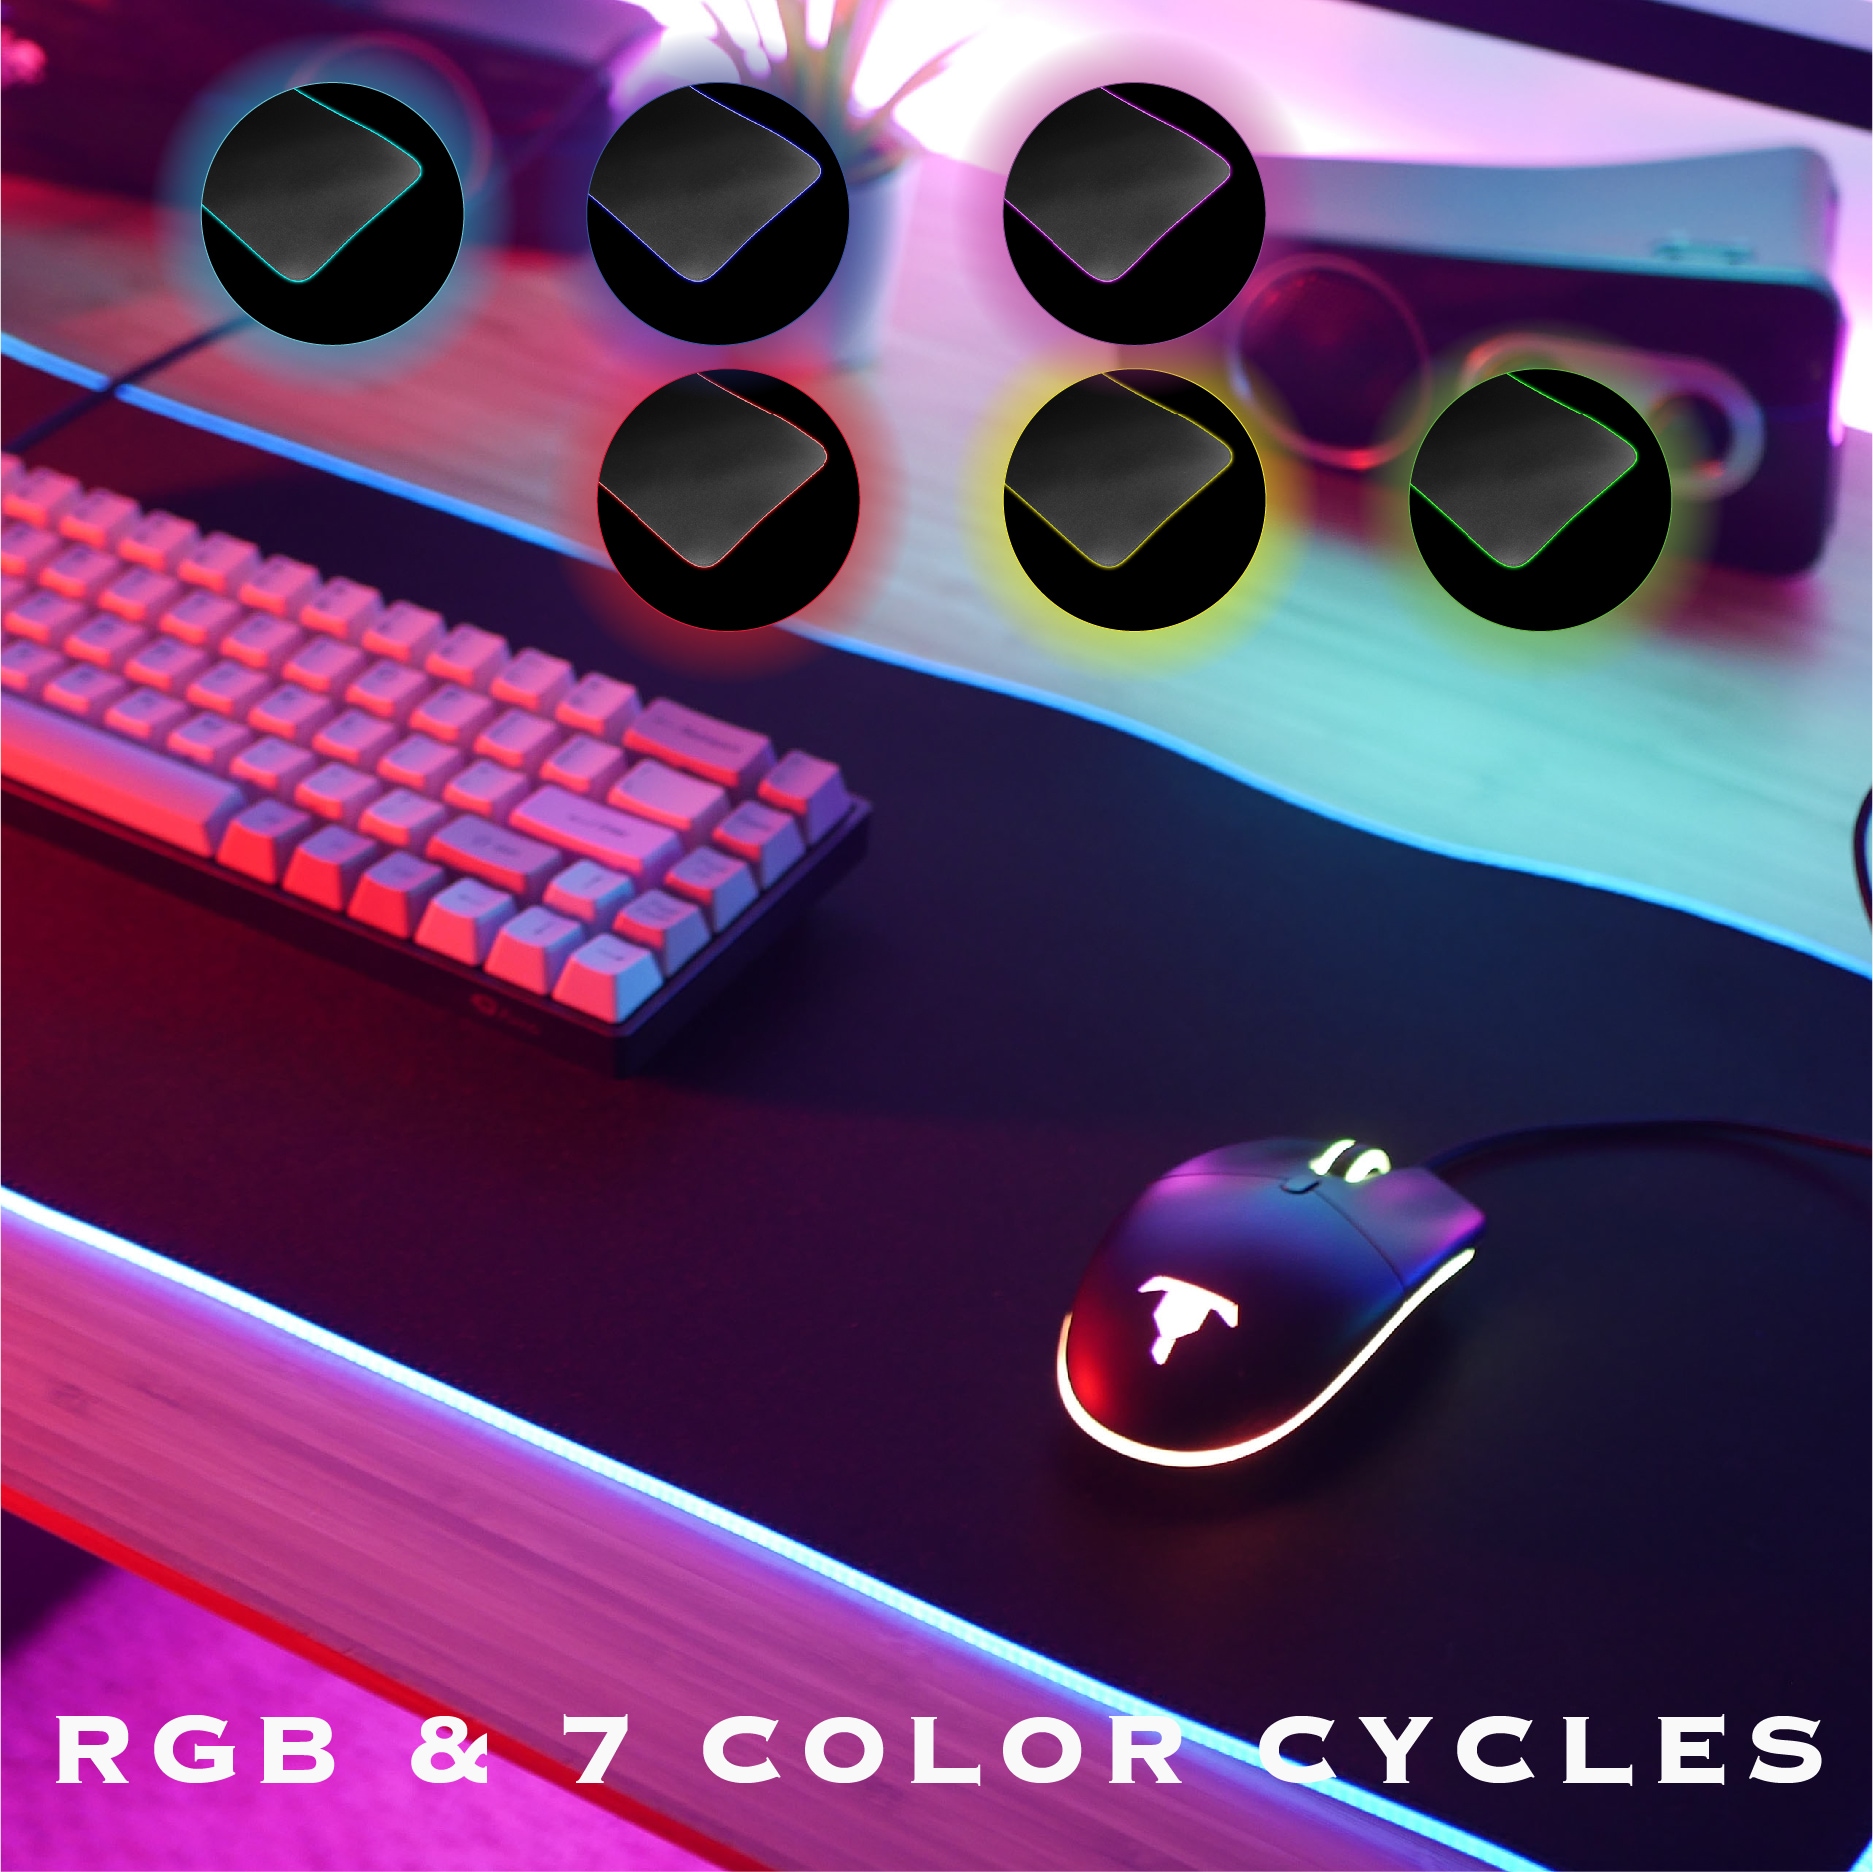 Live Tech Sunny RGB Gaming Mouse Pad Computer Laptop Mouse Pad Mat